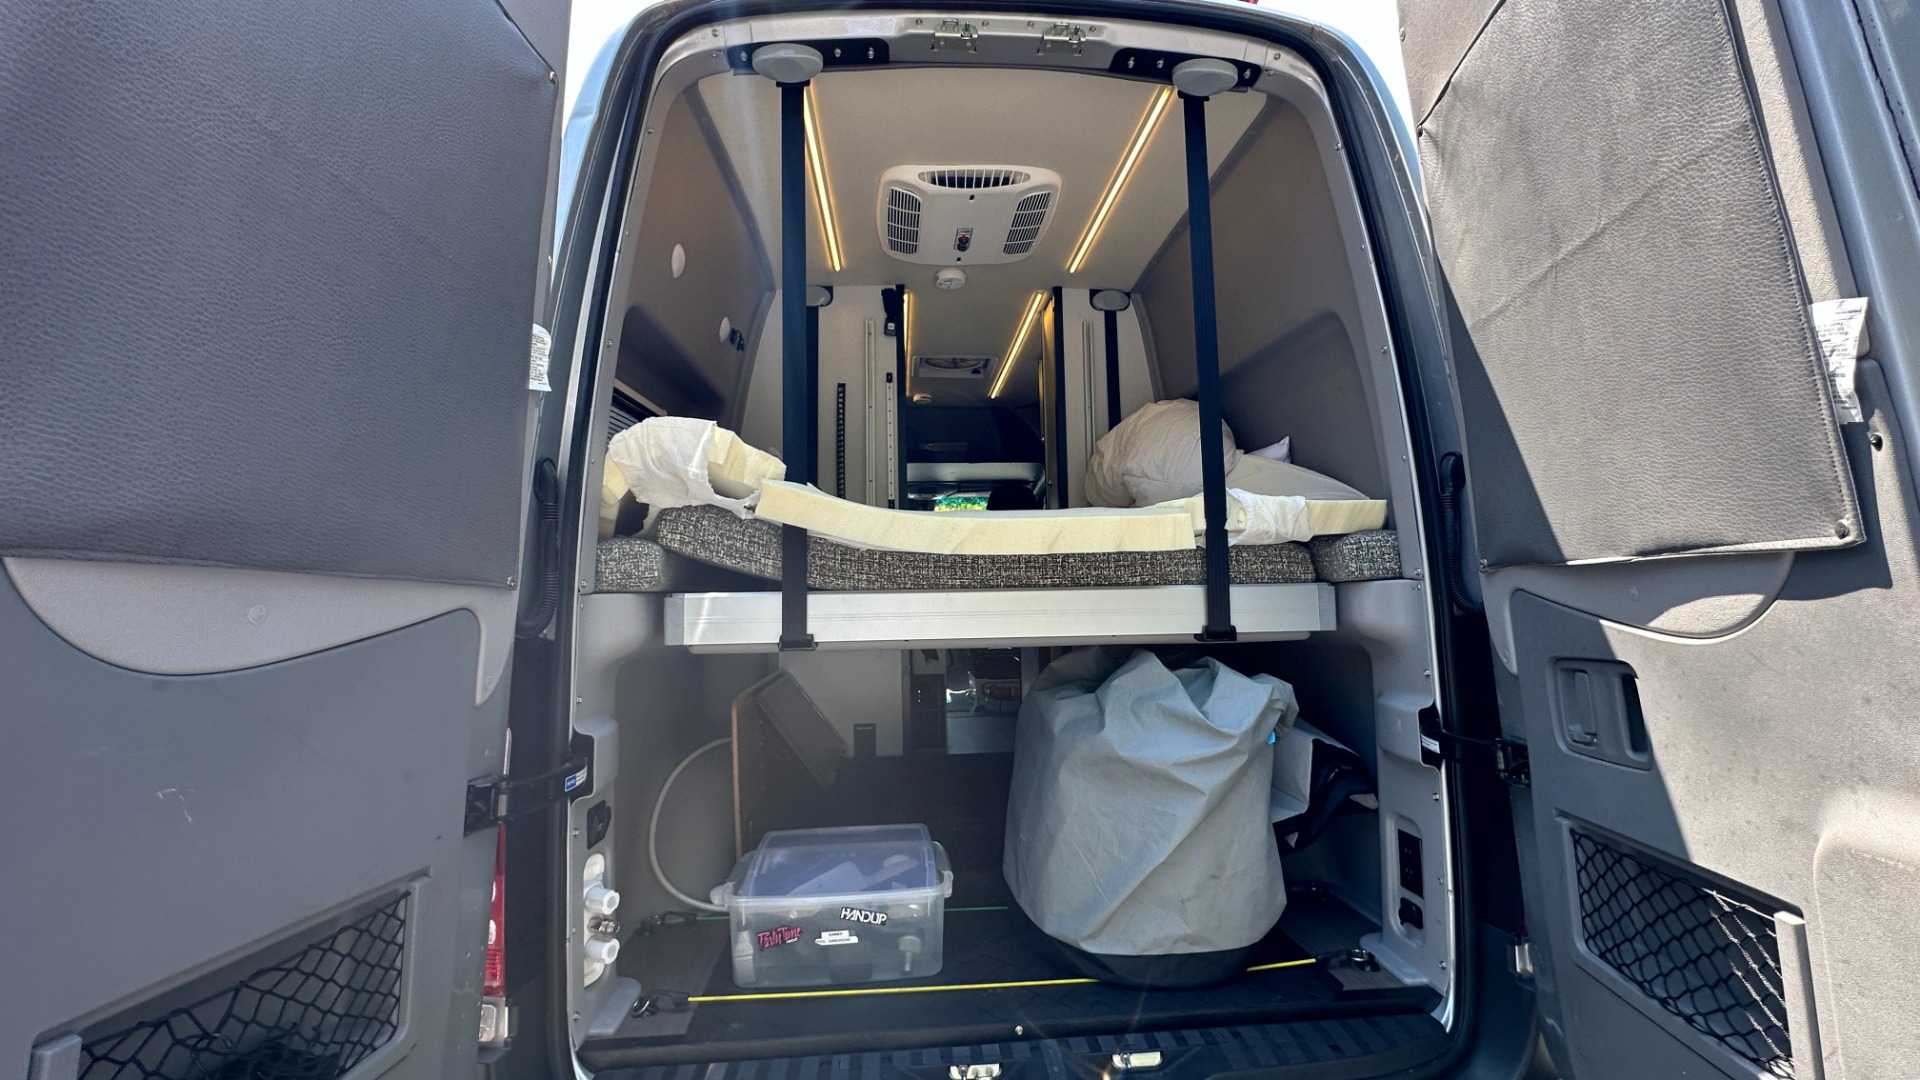 Used 2018 Mercedes-Benz Sprinter Winnebego OVERLANDER / CONVERSION SPRINTER / 4X4 / KITCHEN / BATHROOM / AIR / AWNING for sale $129,000 at Formula Imports in Charlotte NC 28227 93